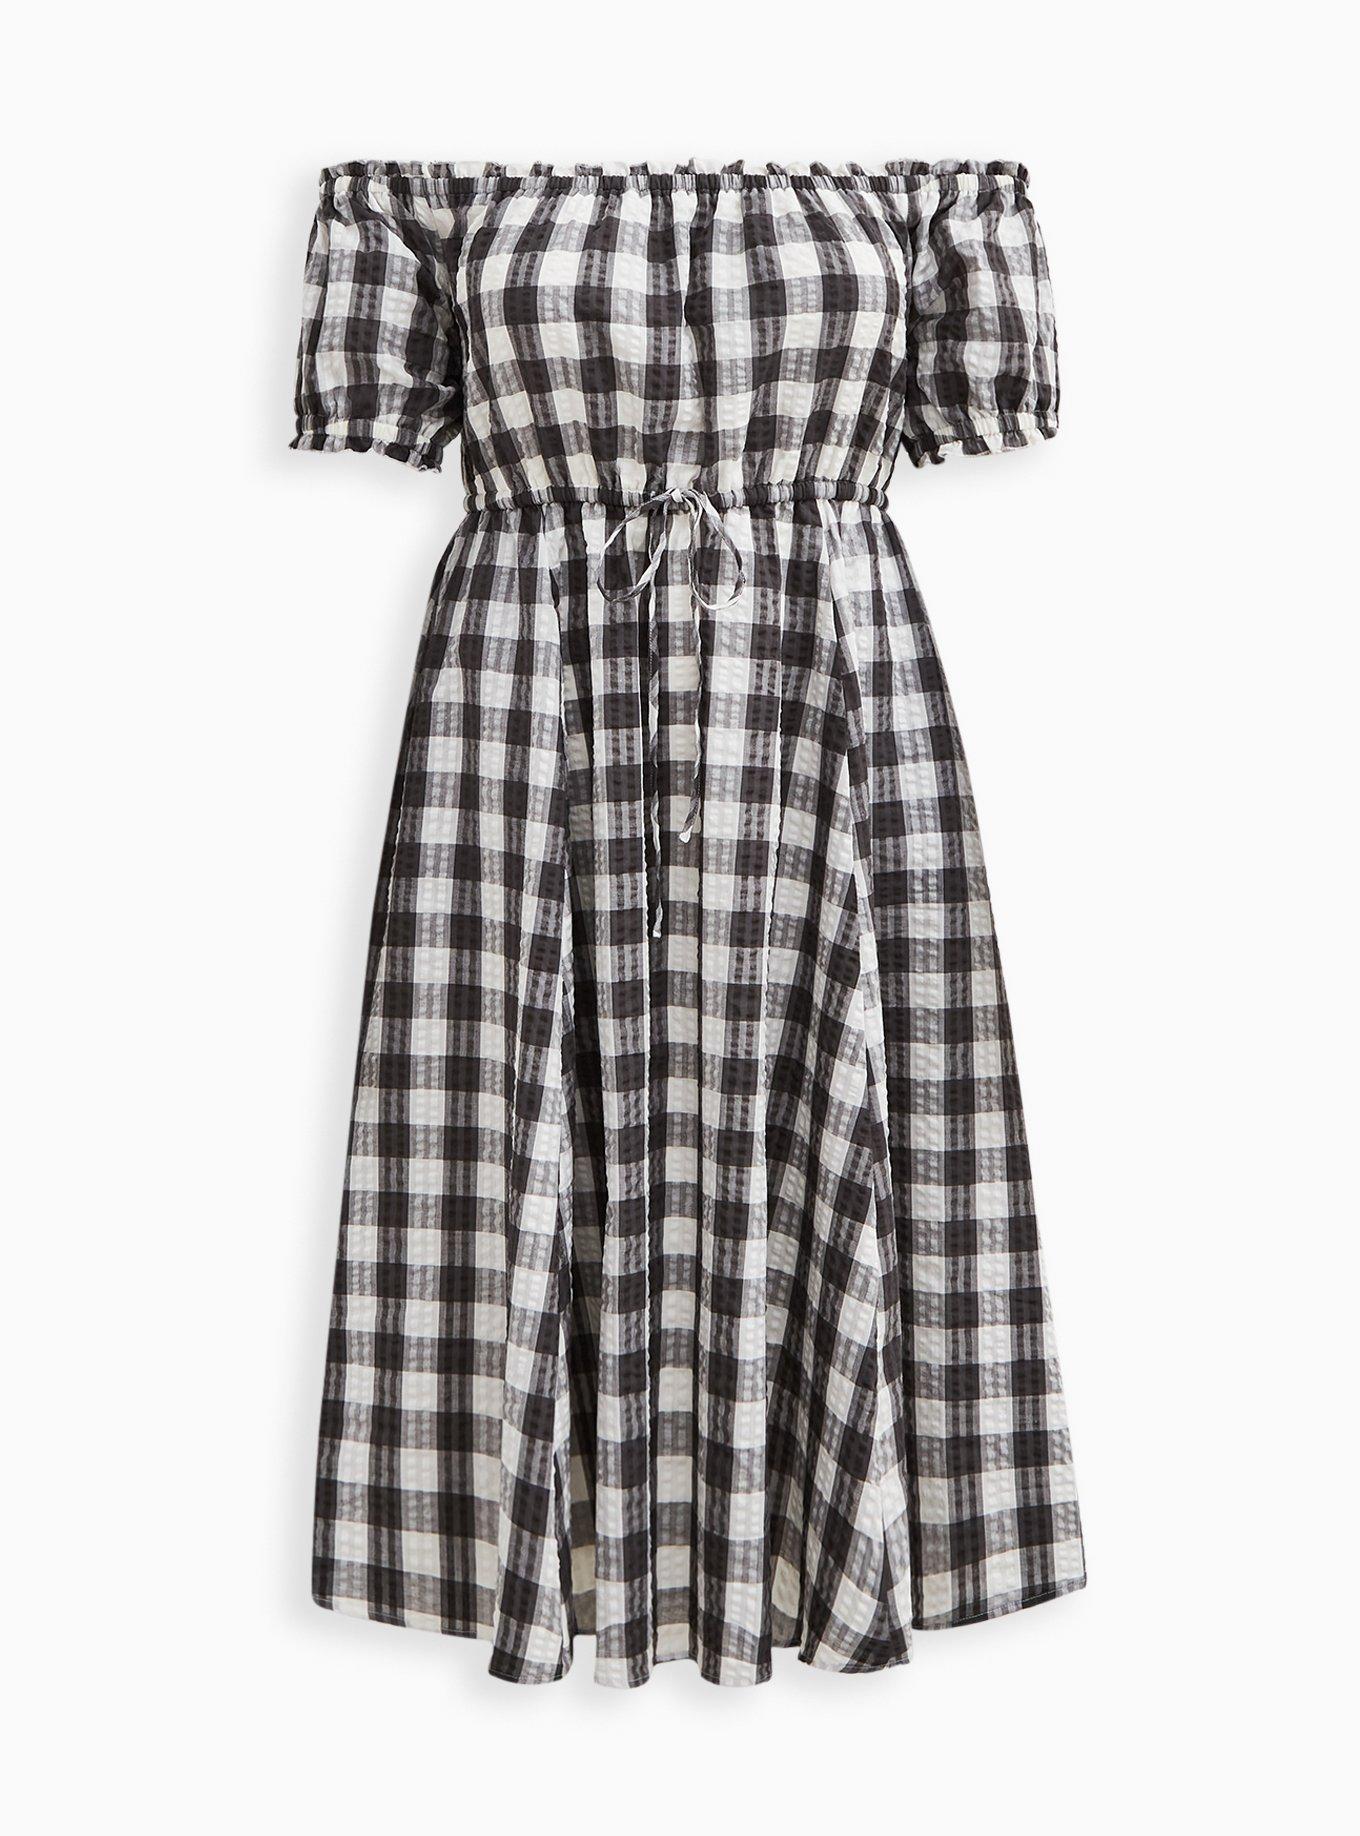 Stylish Pink And Grey Plaid Strapless Off Shoulder Gingham Dress